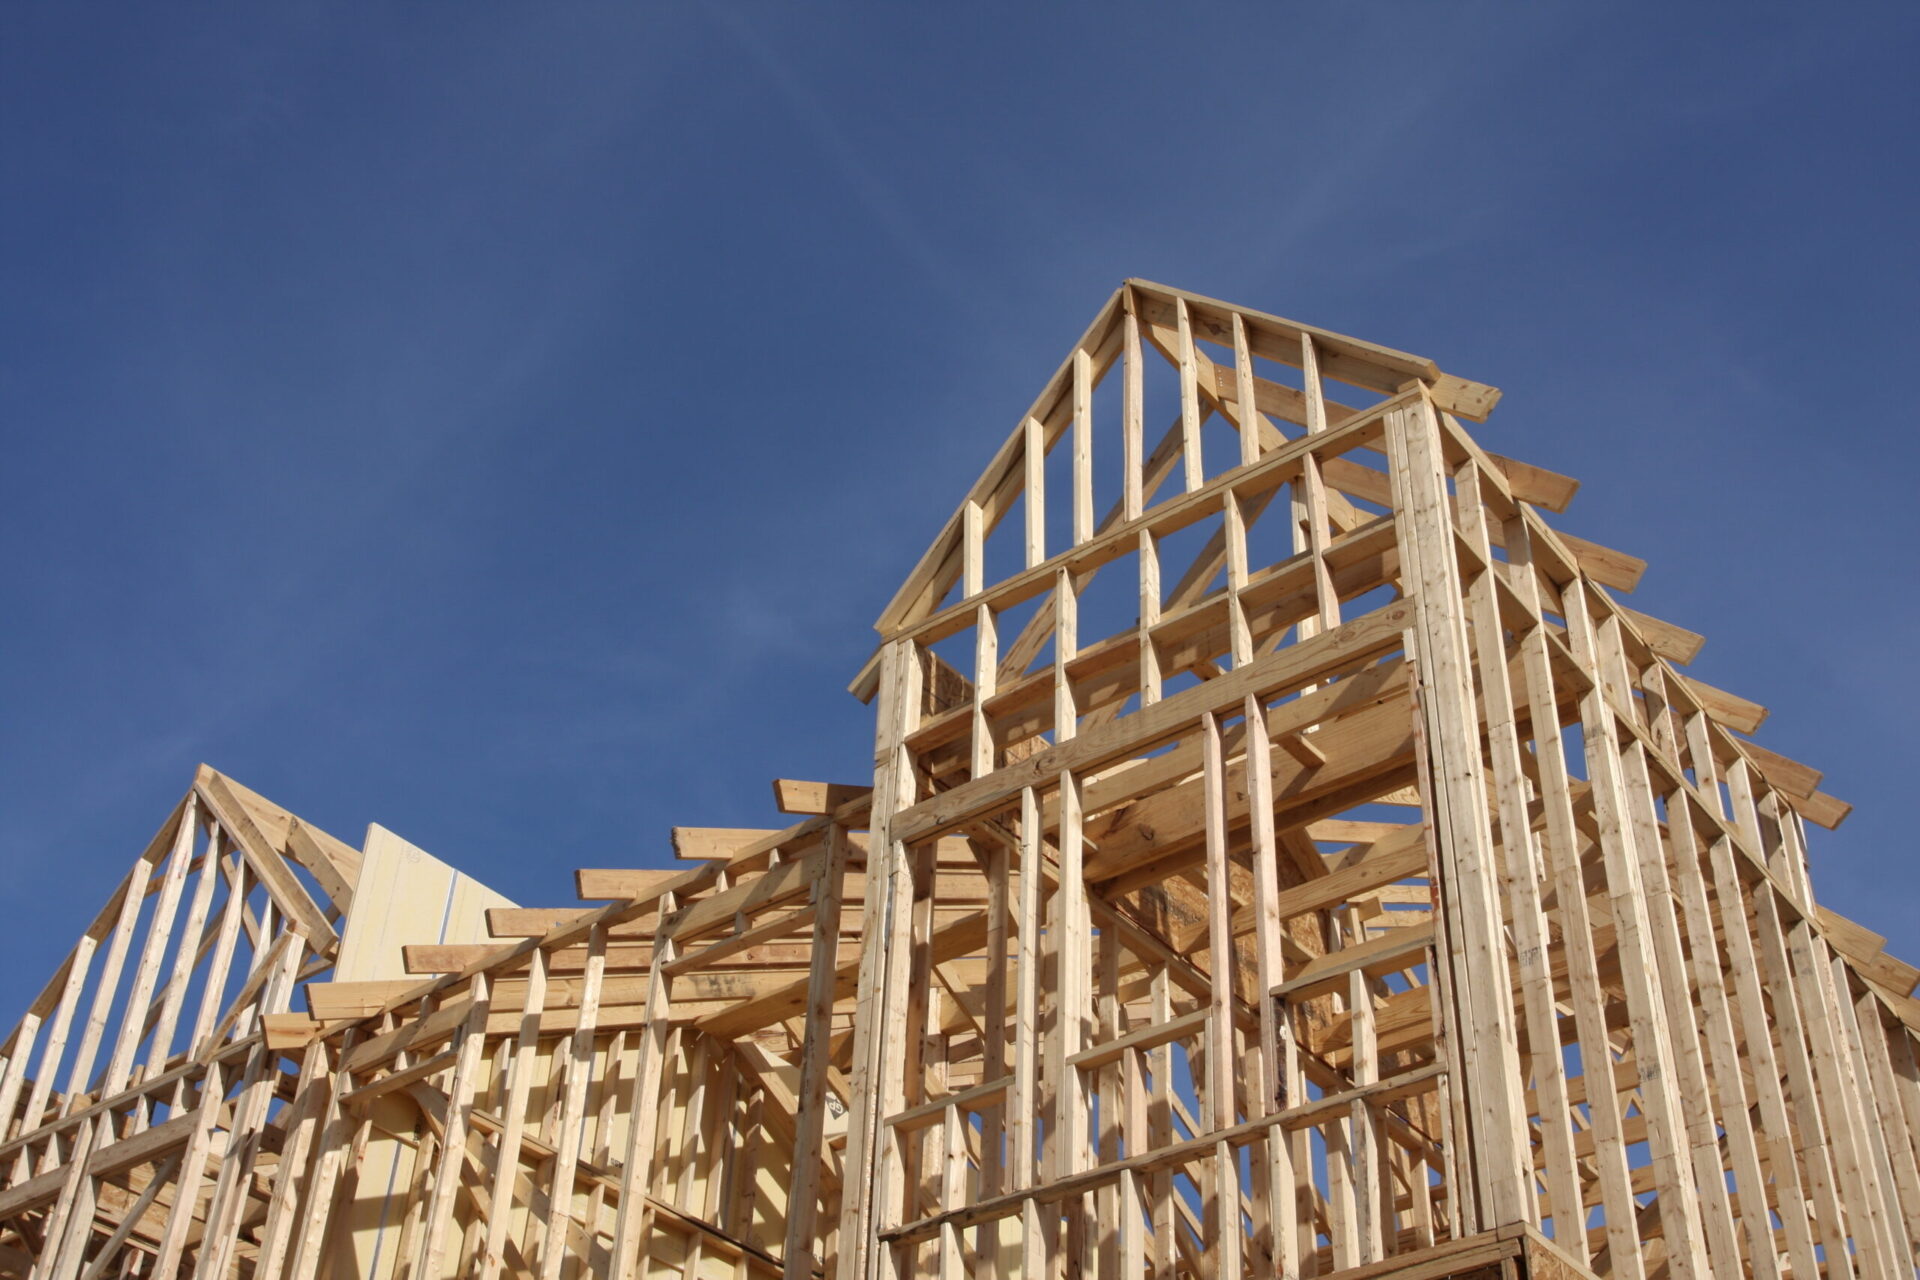 60% Of US Households Can’t Afford Newly Built Homes